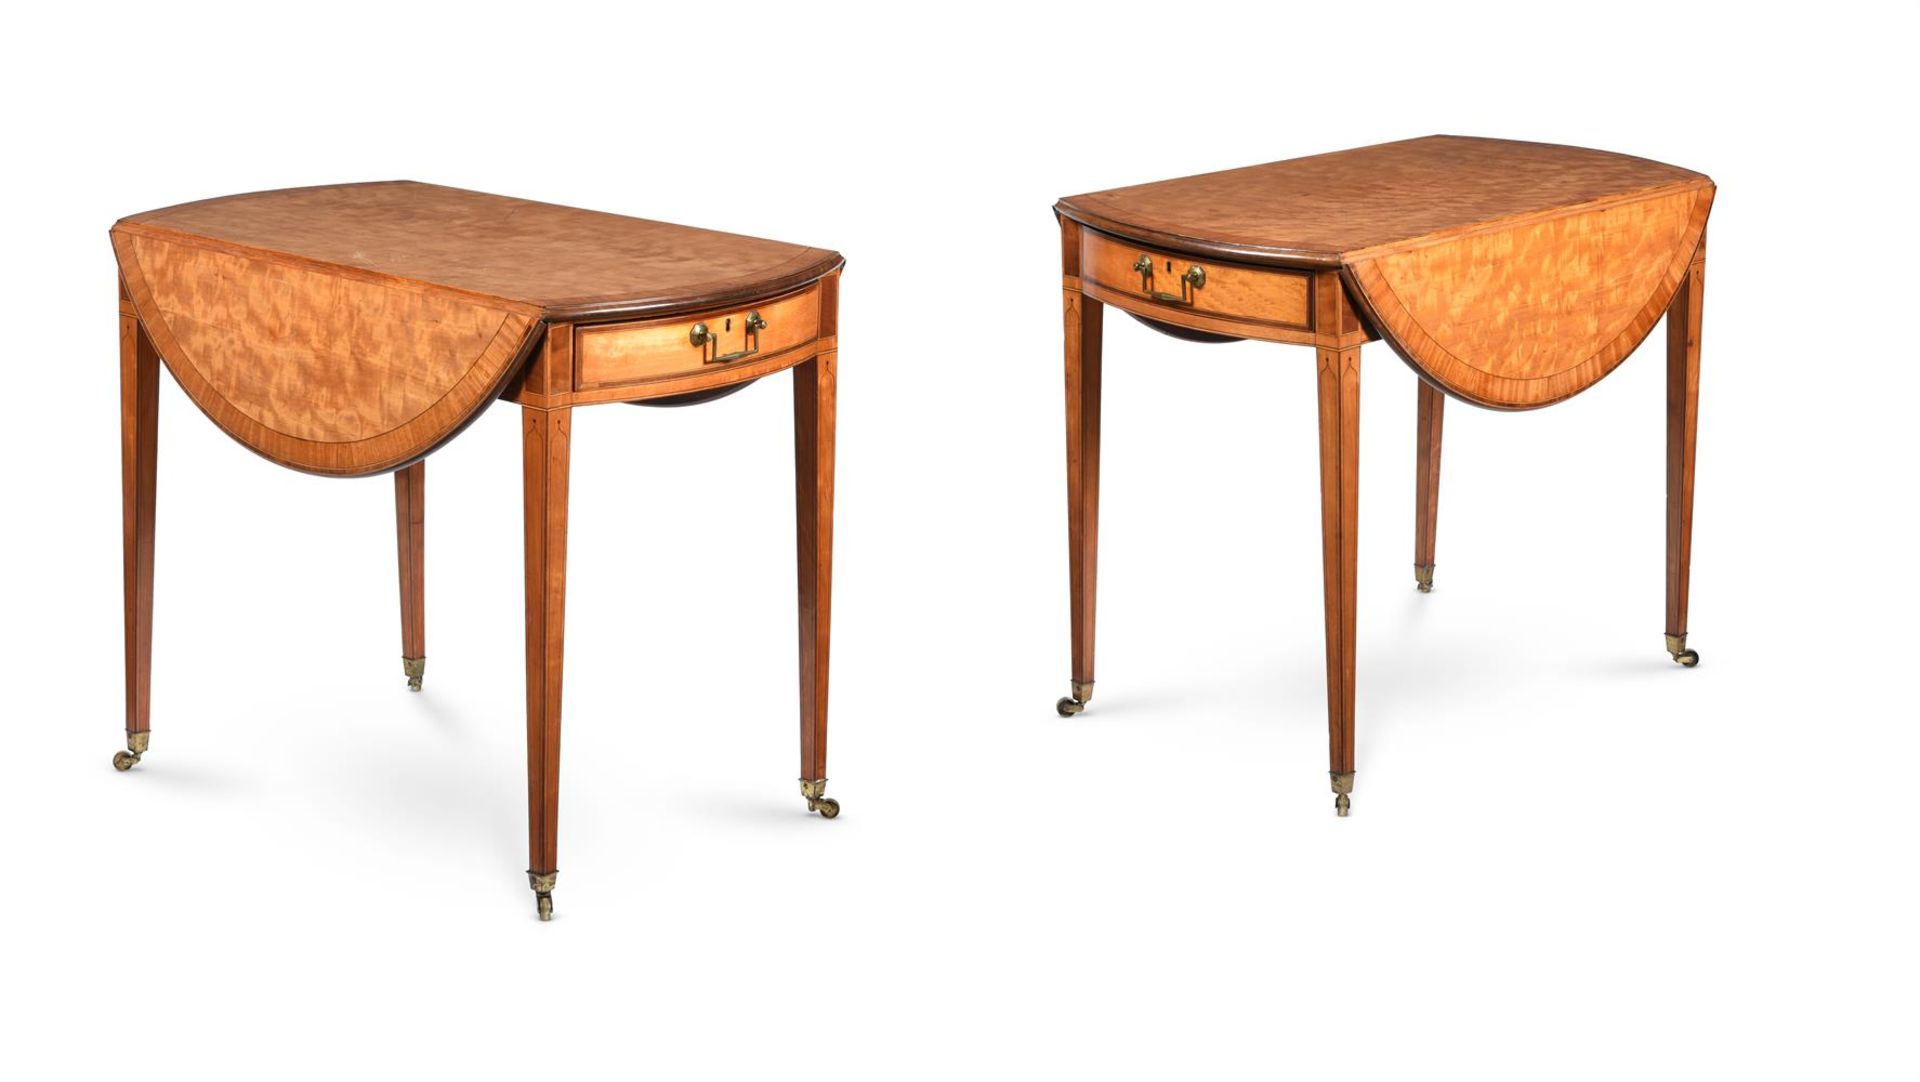 Y A PAIR OF GEORGE III SATINWOOD, PURPLE HEART AND ROSEWOOD BANDED OVAL PEMBROKE TABLES, CIRCA 1780